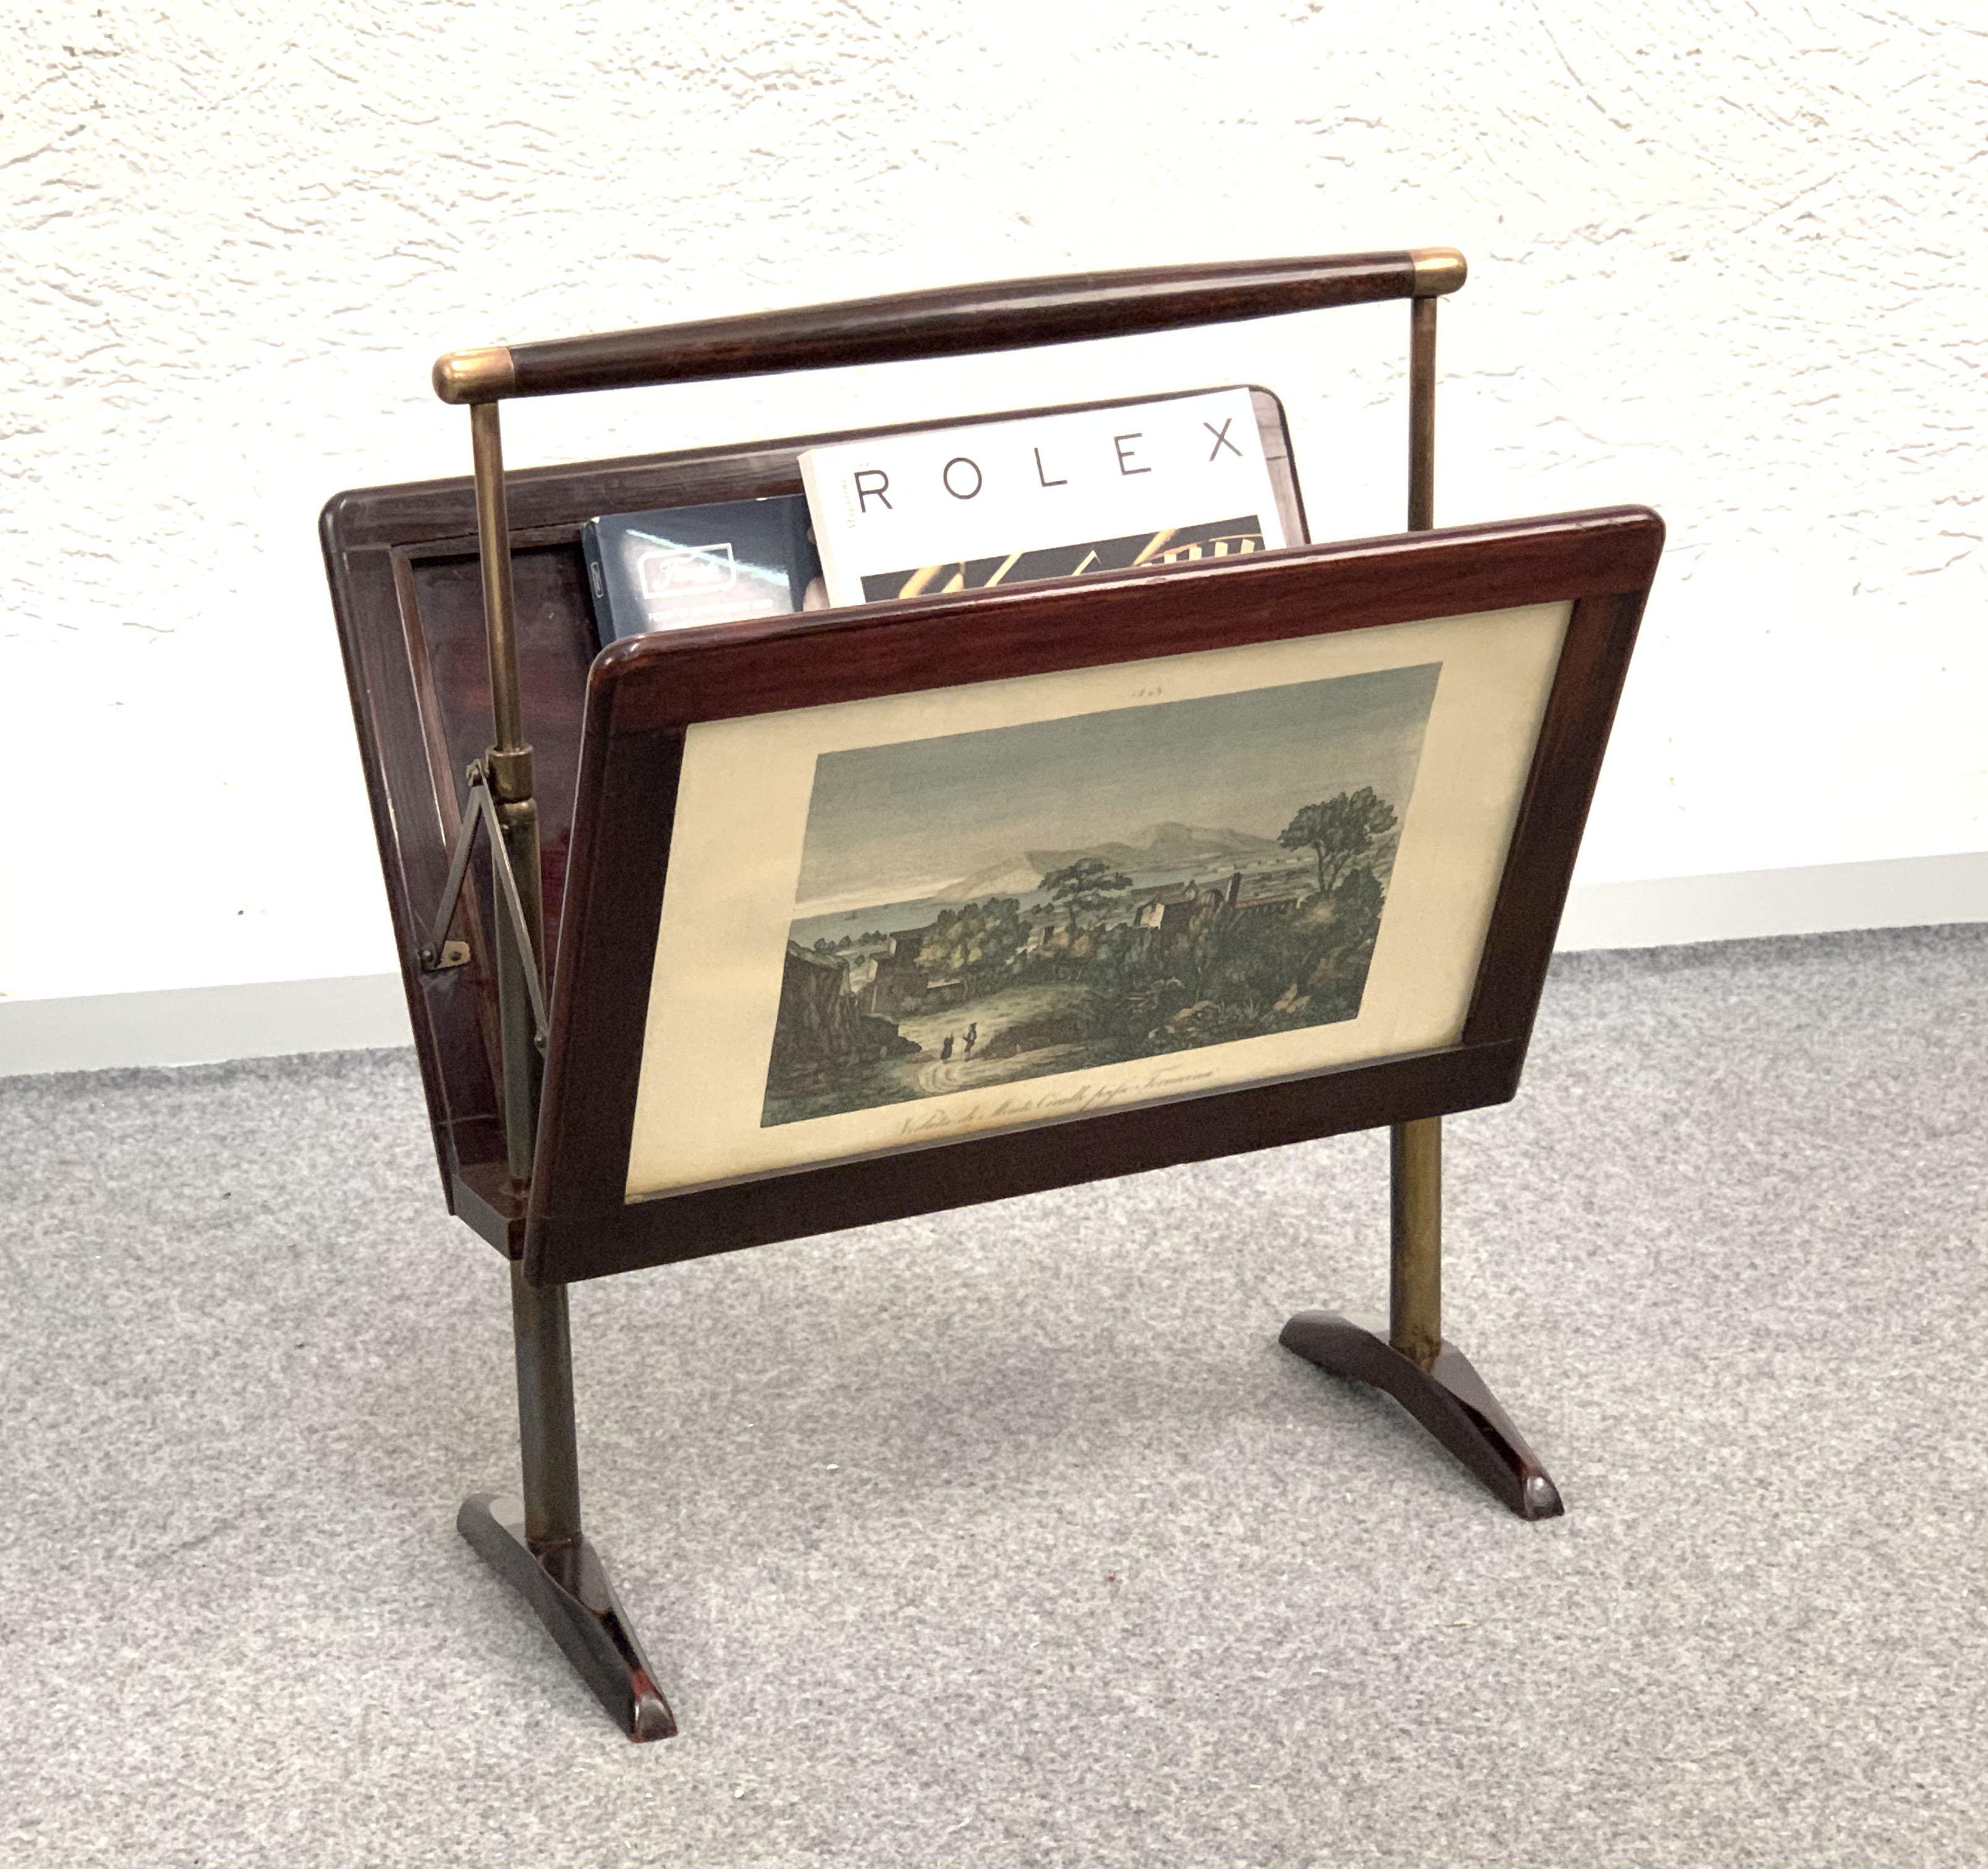 Amazing midcentury wood and brass folding magazine rack. This item was produced in Italy during 1950s in the style of Ico Parisi.

This folding magazine rack is marvellous as it has two watercolour landscapes engravings on each side affixed behind